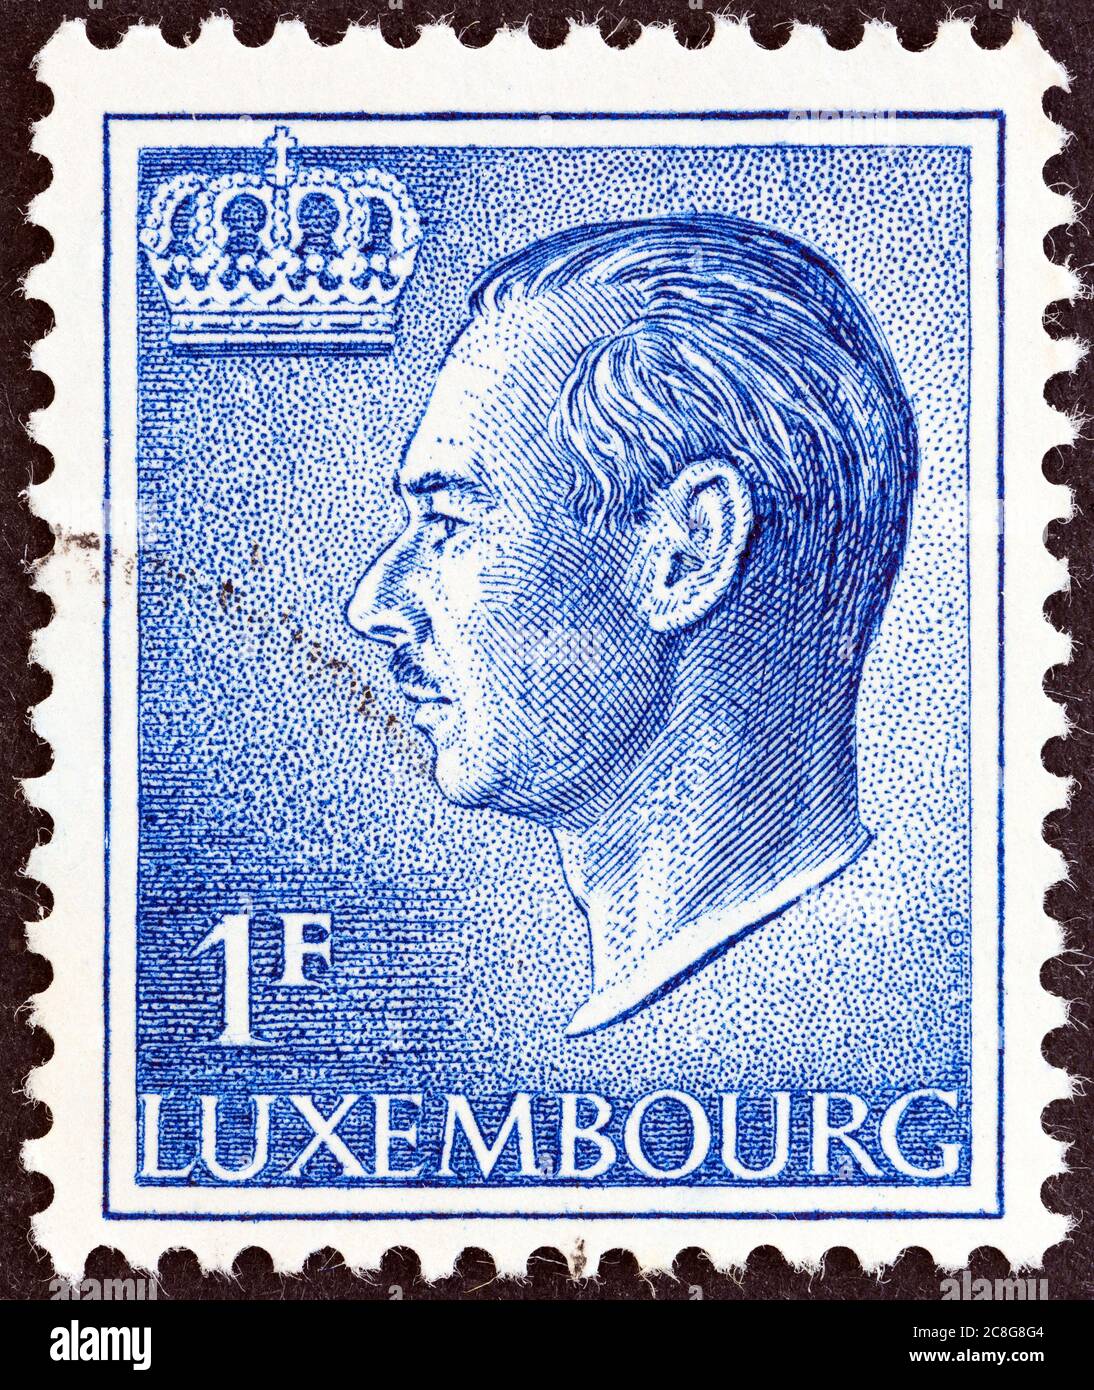 LUXEMBOURG - CIRCA 1965: A stamp printed in Luxembourg shows a portrait of Grand Duke Jean, circa 1965. Stock Photo